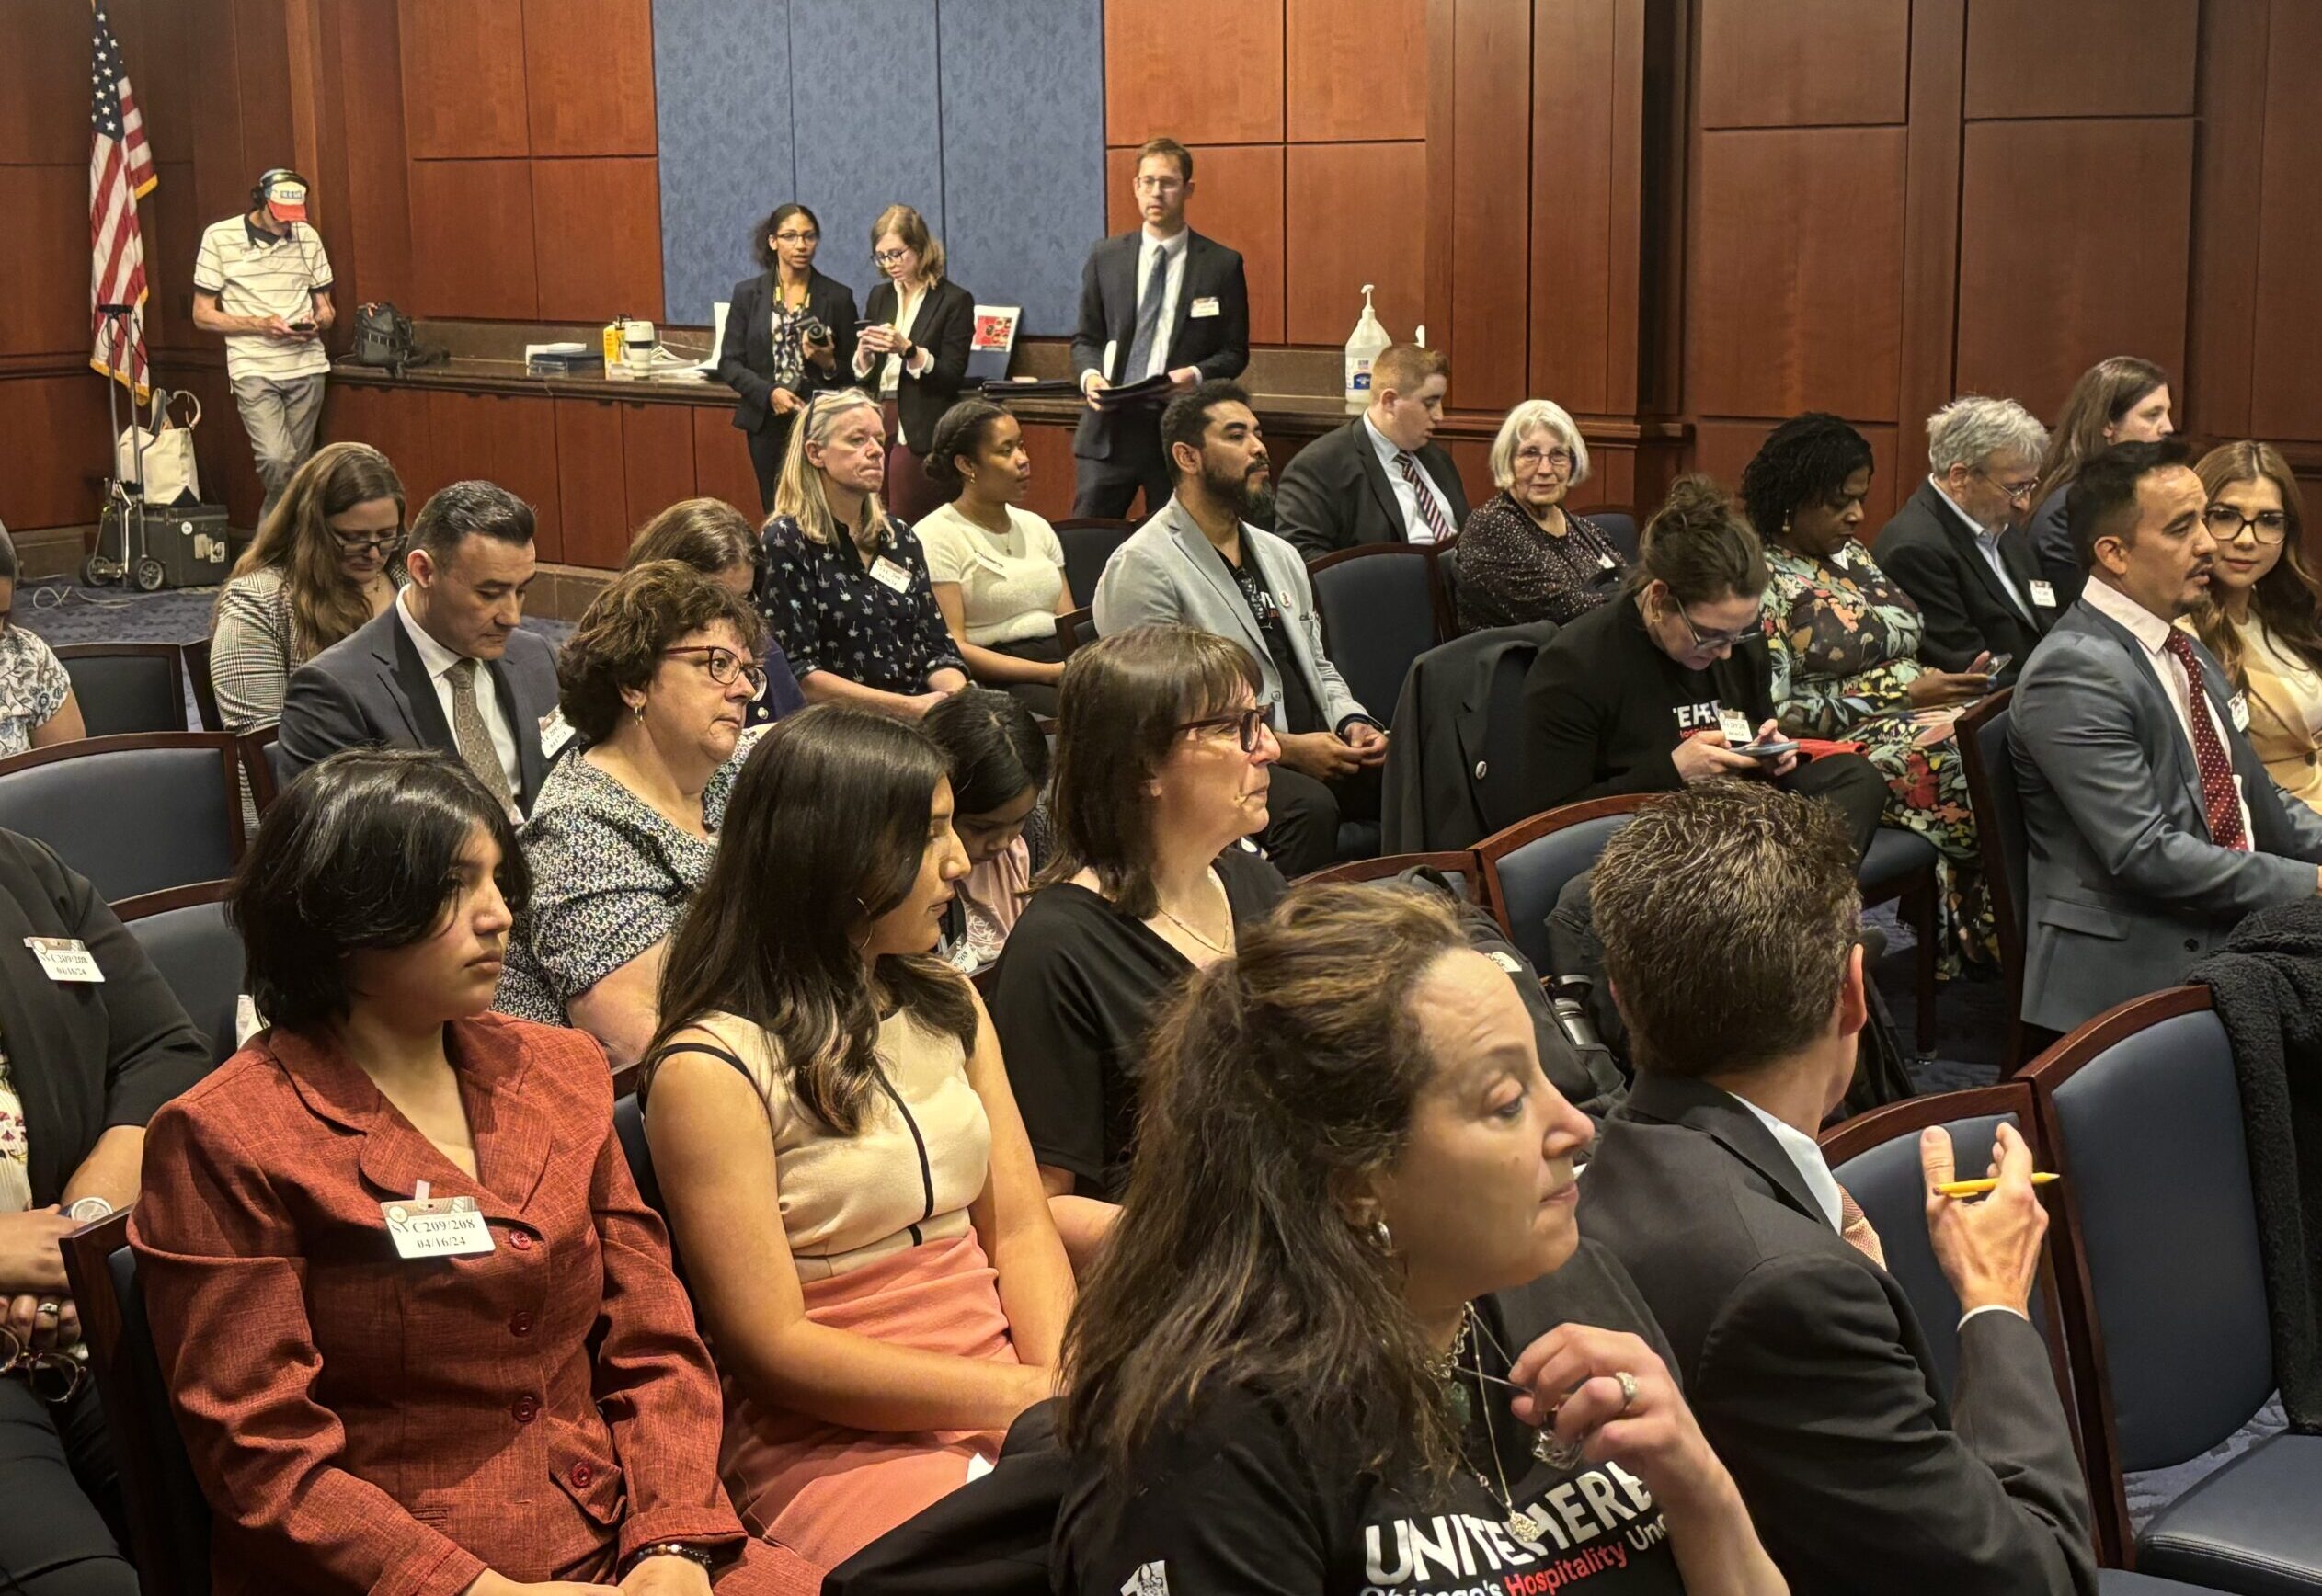 VIDEO/PHOTOS: Sens. Durbin and Padilla, Labor, Business and Mixed-Status Families — Access to Work Permits for Long-Term Immigrants Equals $5B More in Taxes